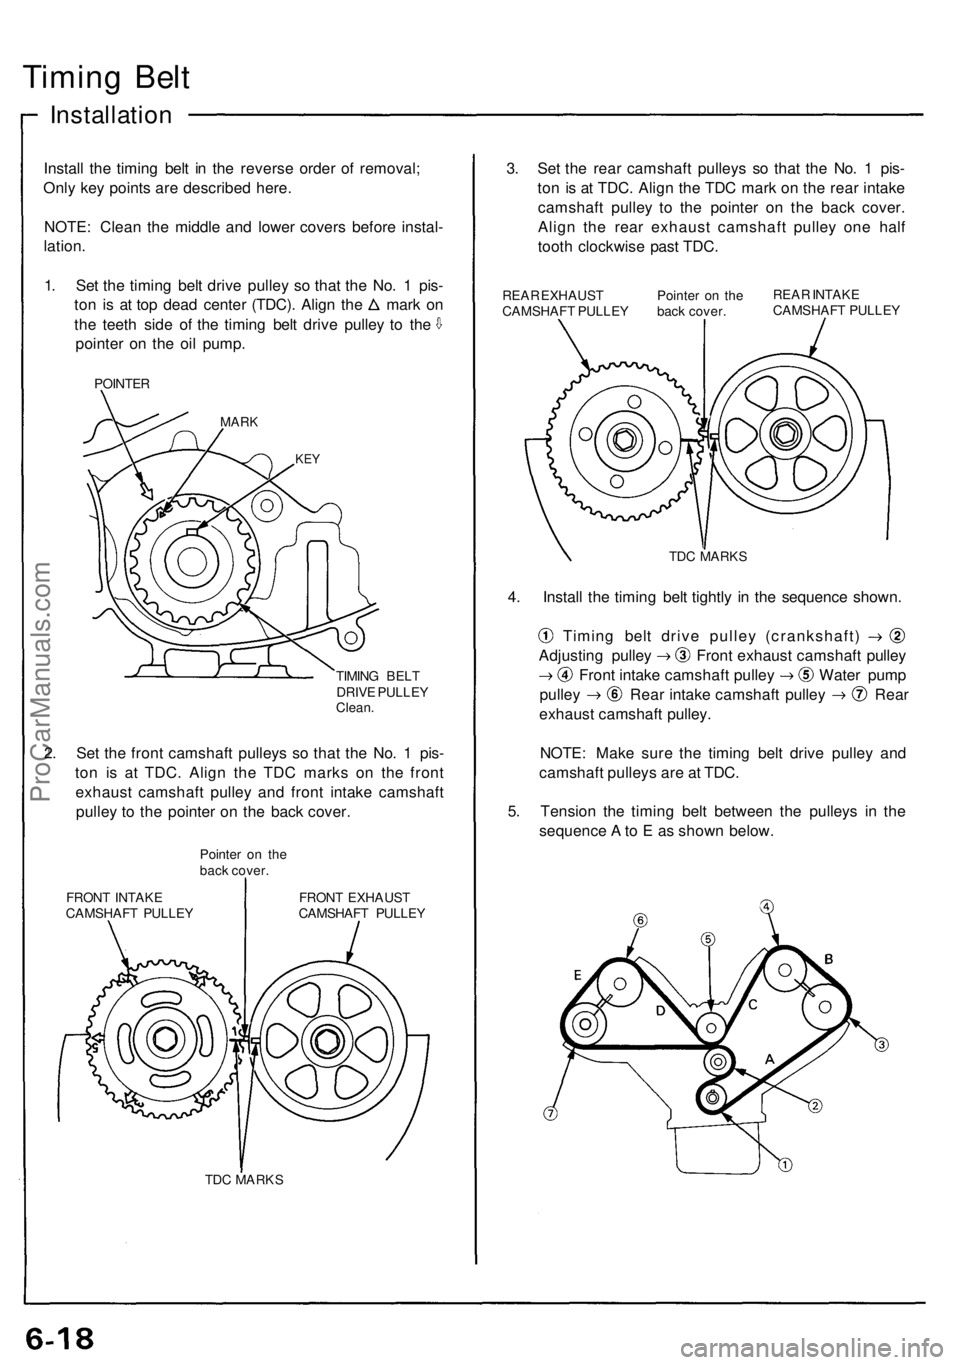 ACURA NSX 1991  Service Repair Manual 
Timing Belt

Installation

Install the timing belt in the reverse order of removal;

Only key points are described here.

NOTE: Clean the middle and lower covers before instal-

lation.

1. Set the t